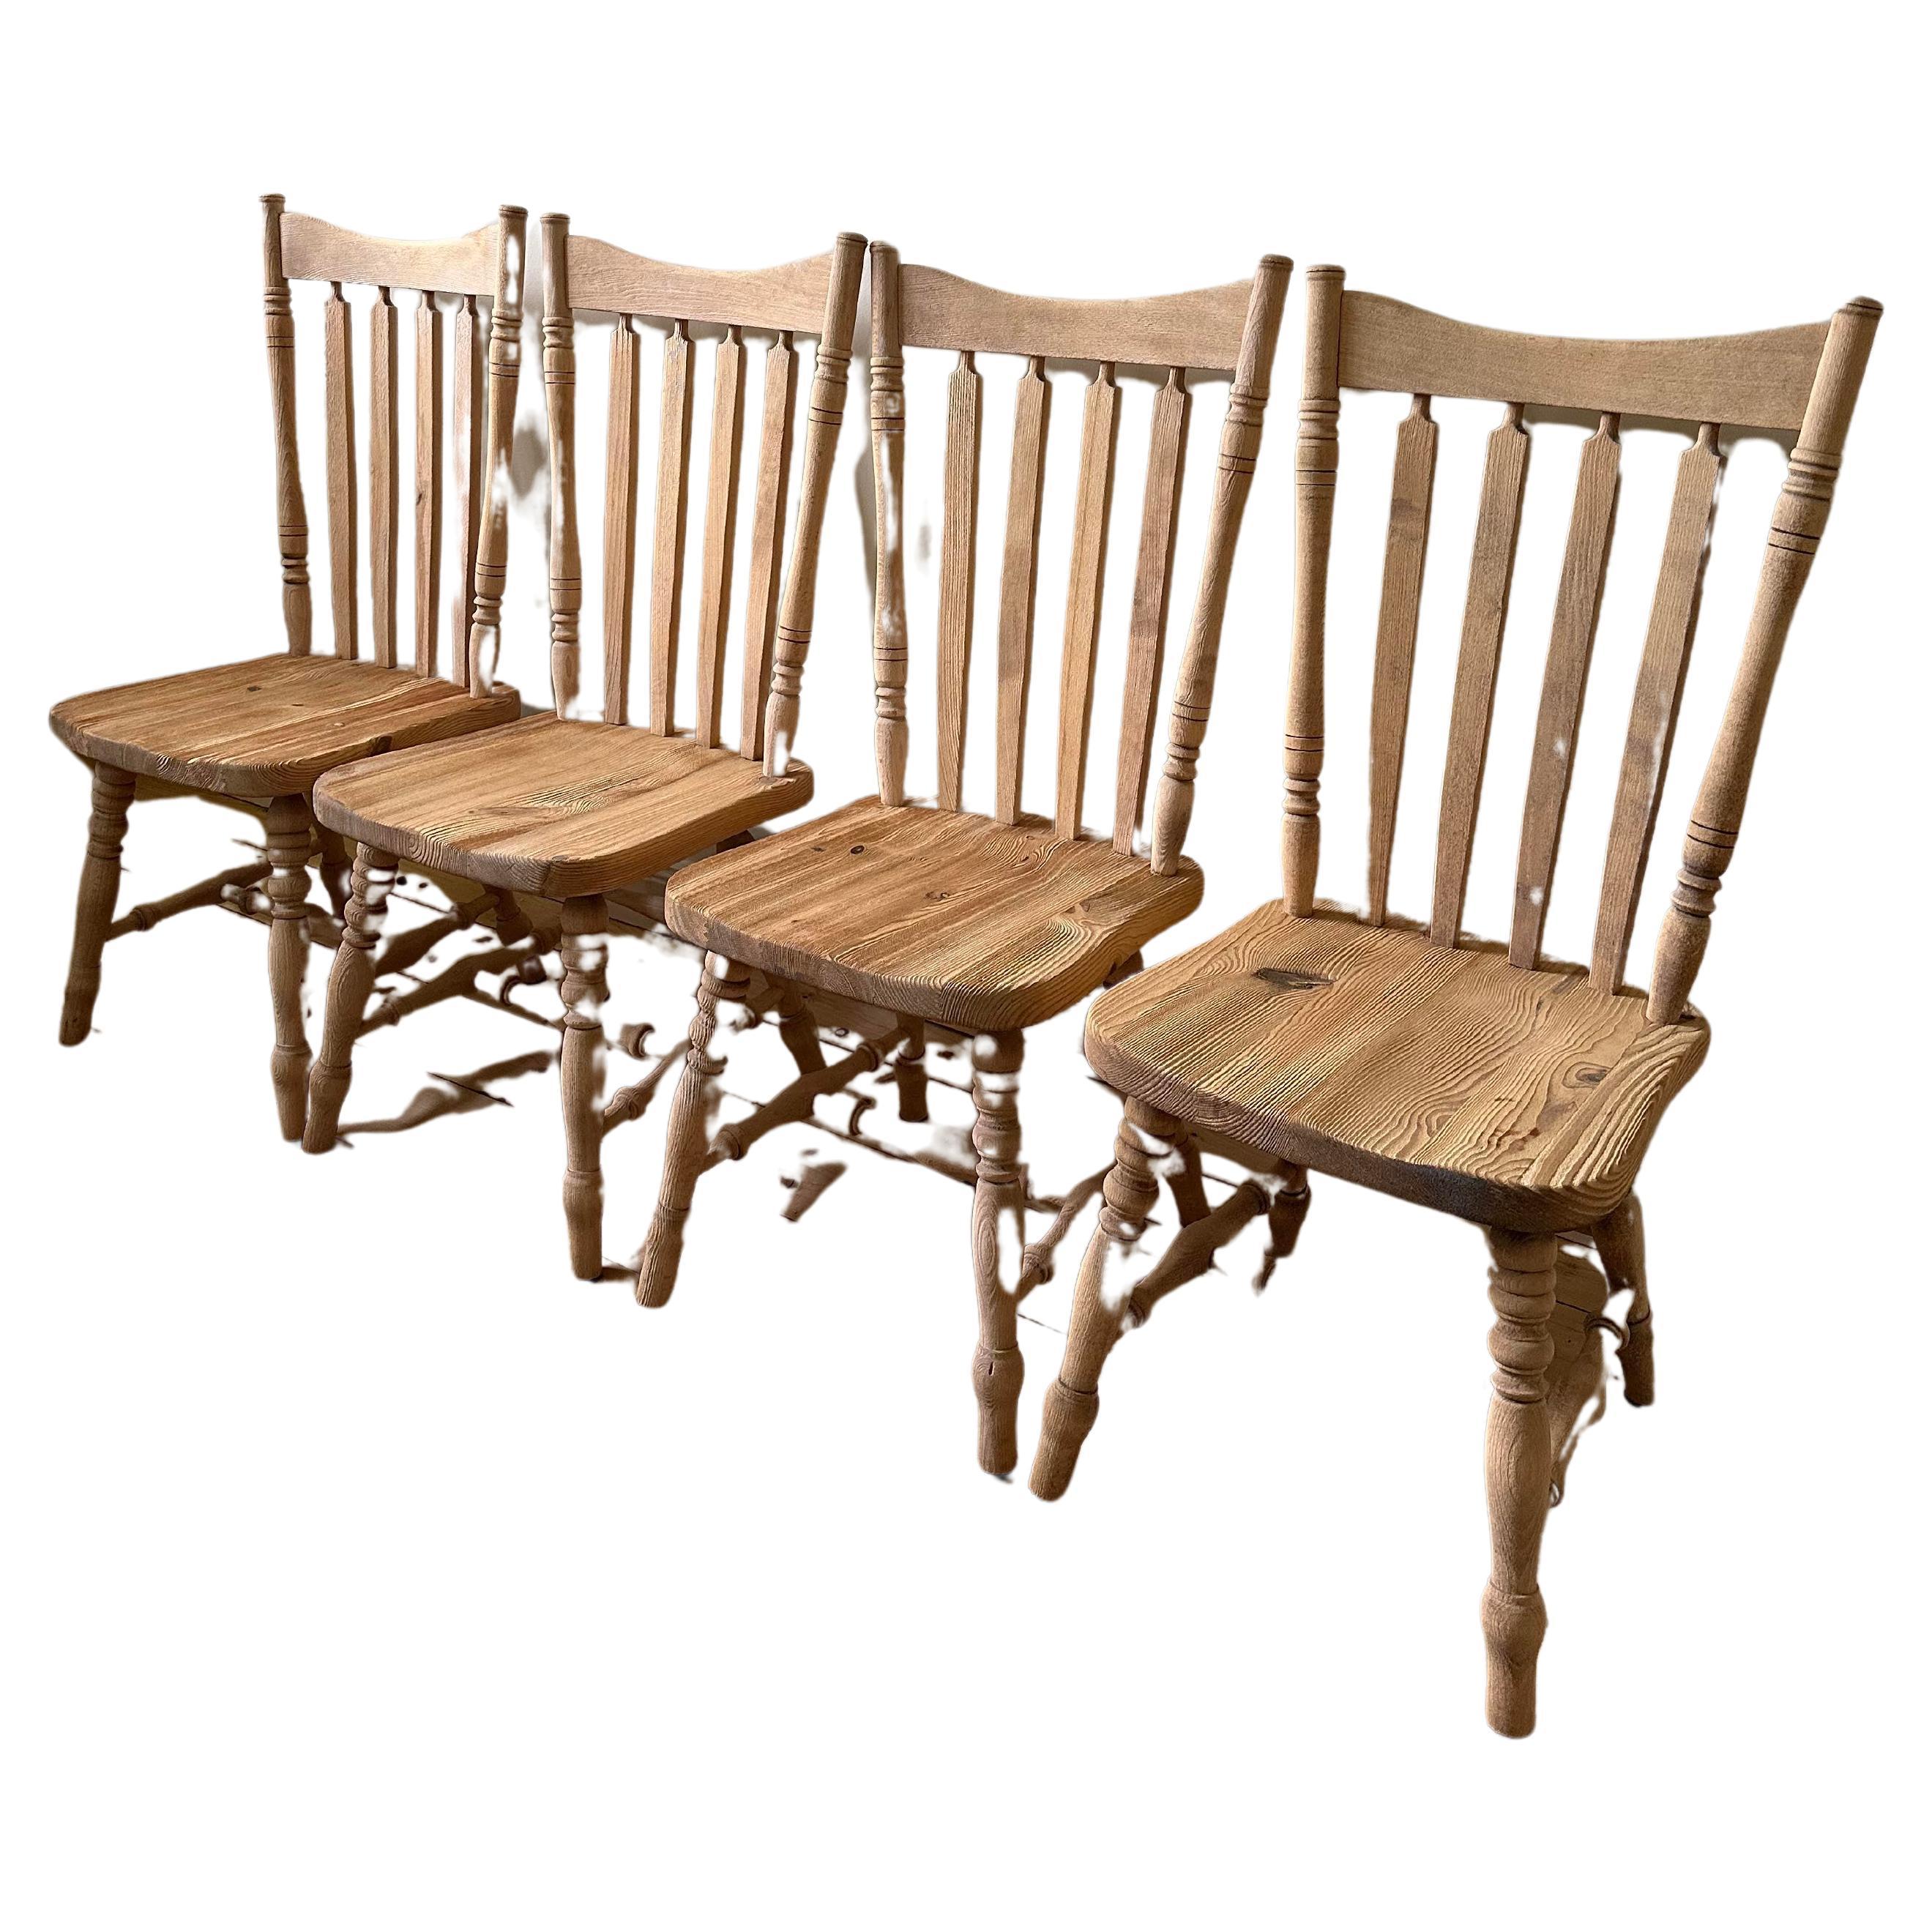 4 massive pine chairs  For Sale